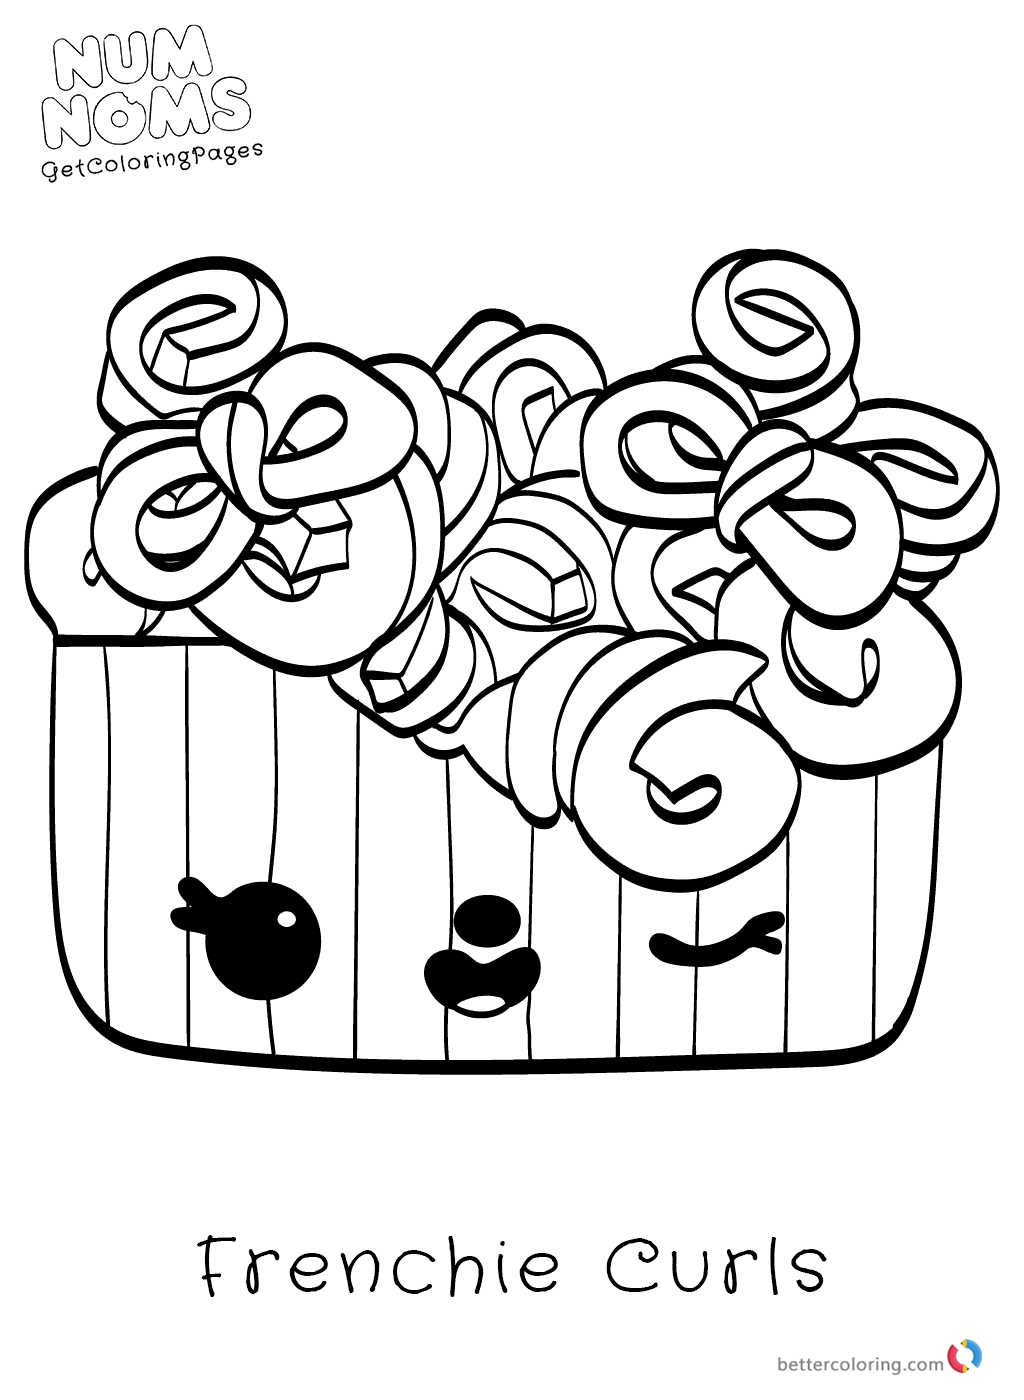 this coloring page Print this Coloring Page Num Noms Coloring